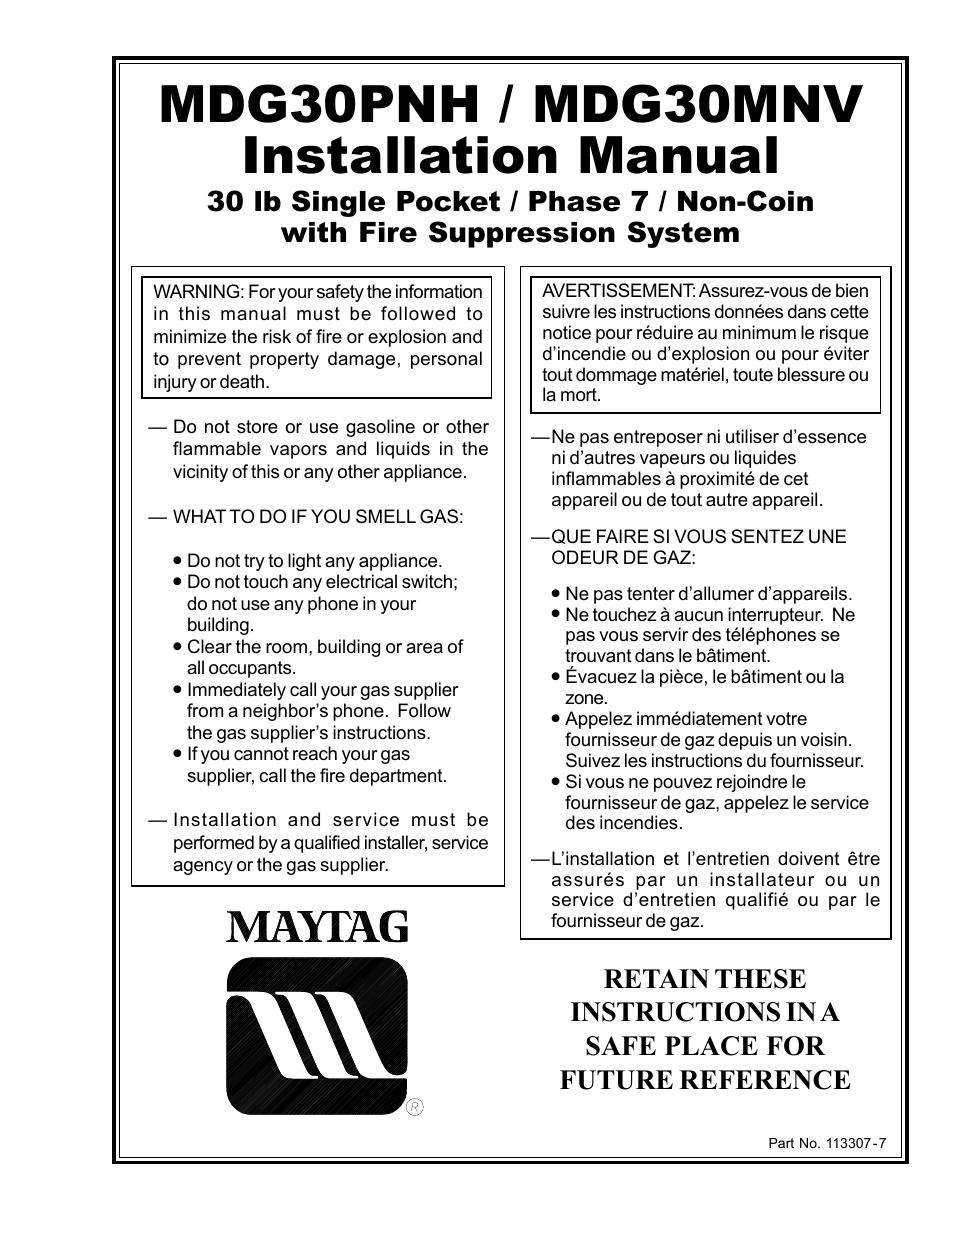 Maytag MDG30MNV User Manual | 36 pages